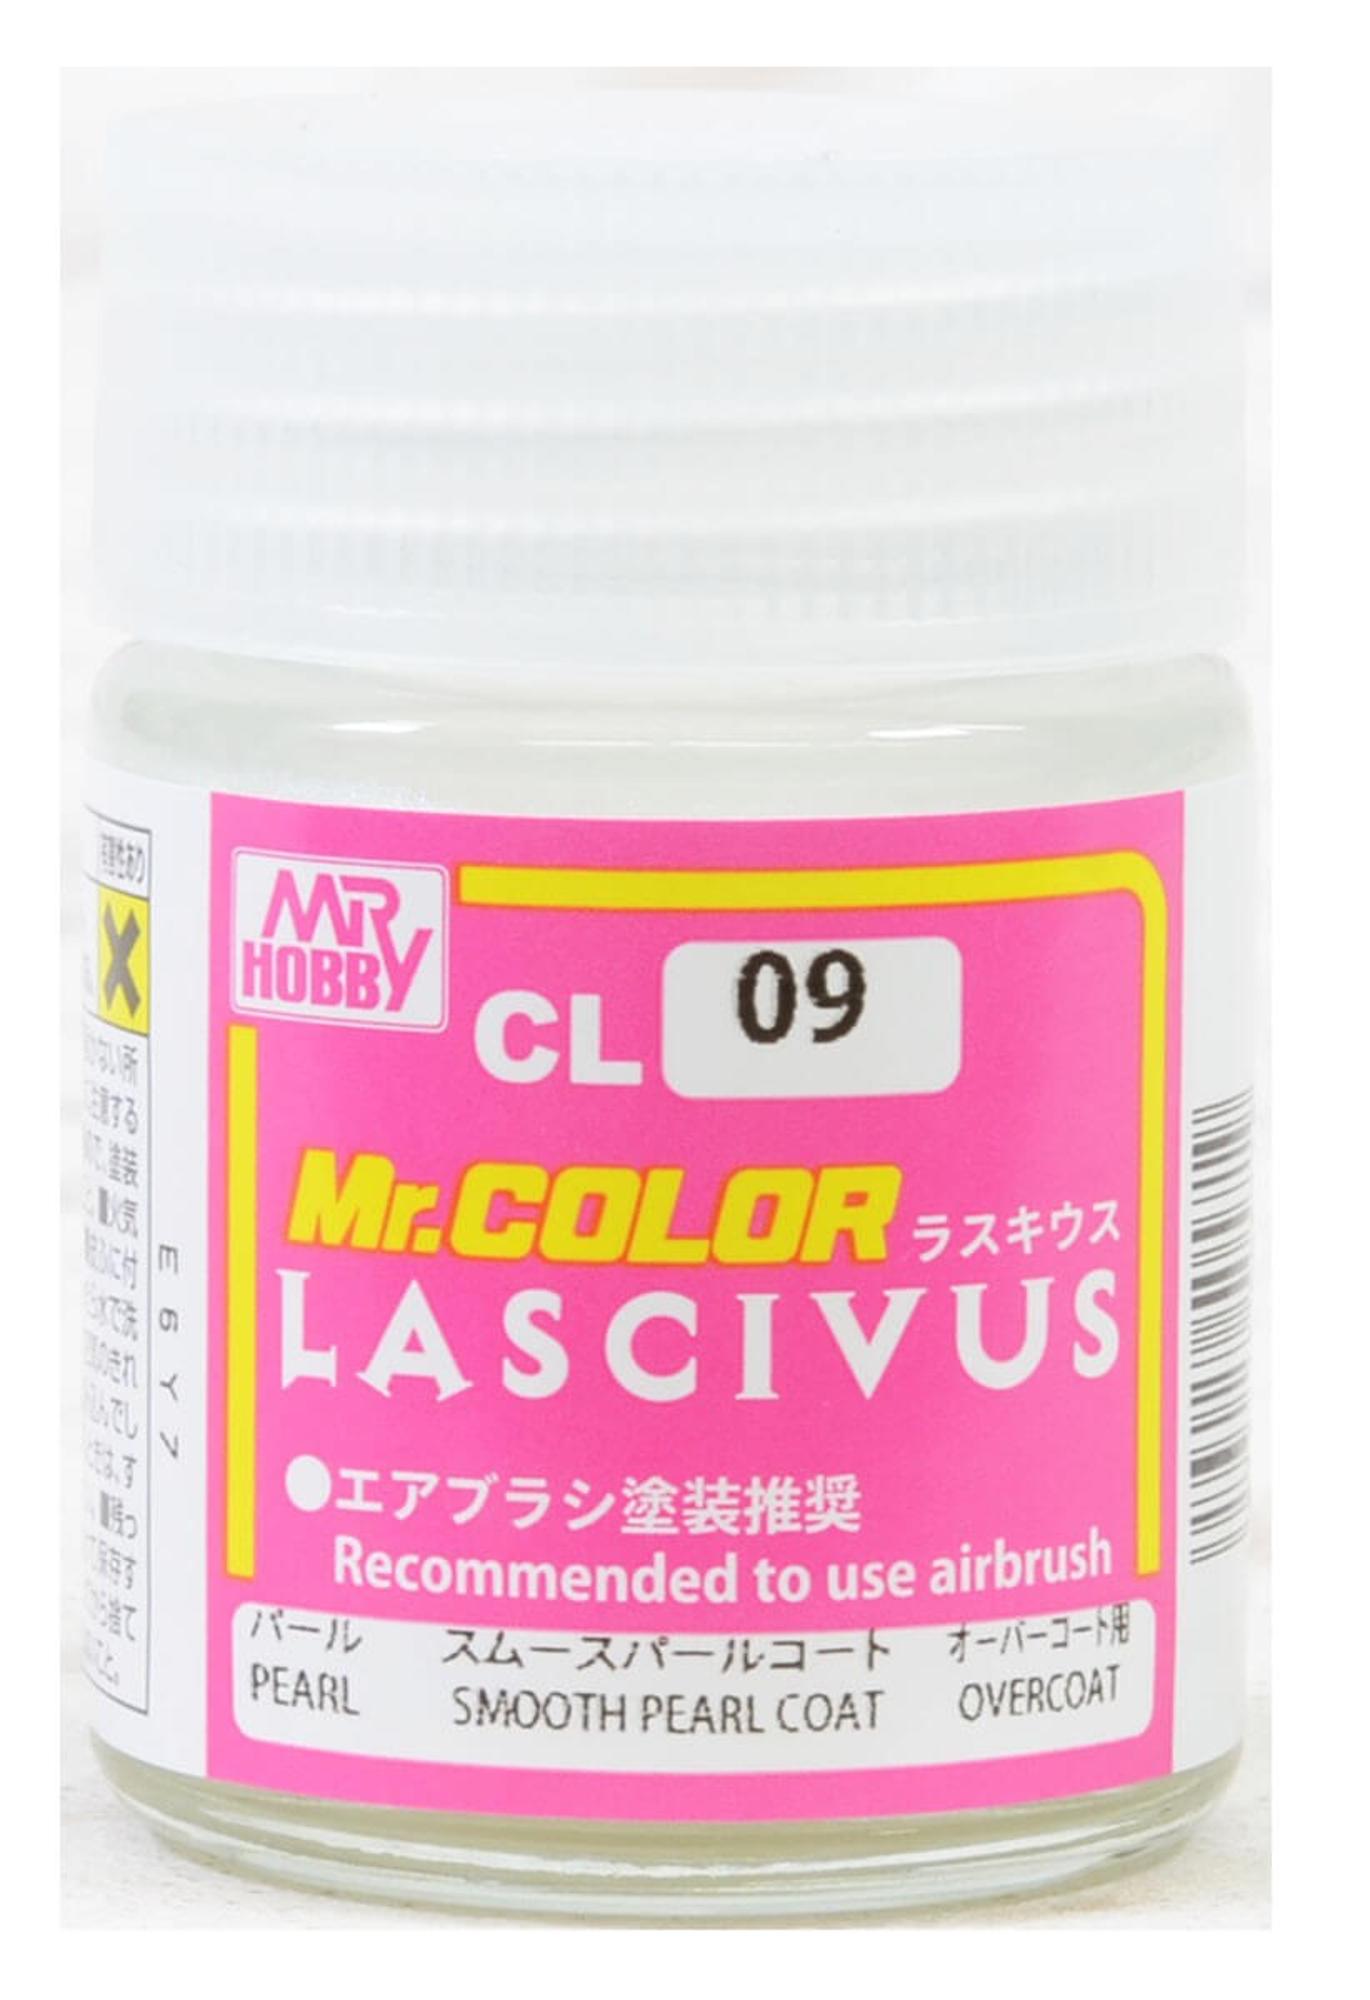 Mr.COLOR Lascivus CL09 Smooth Pearl Overcoat